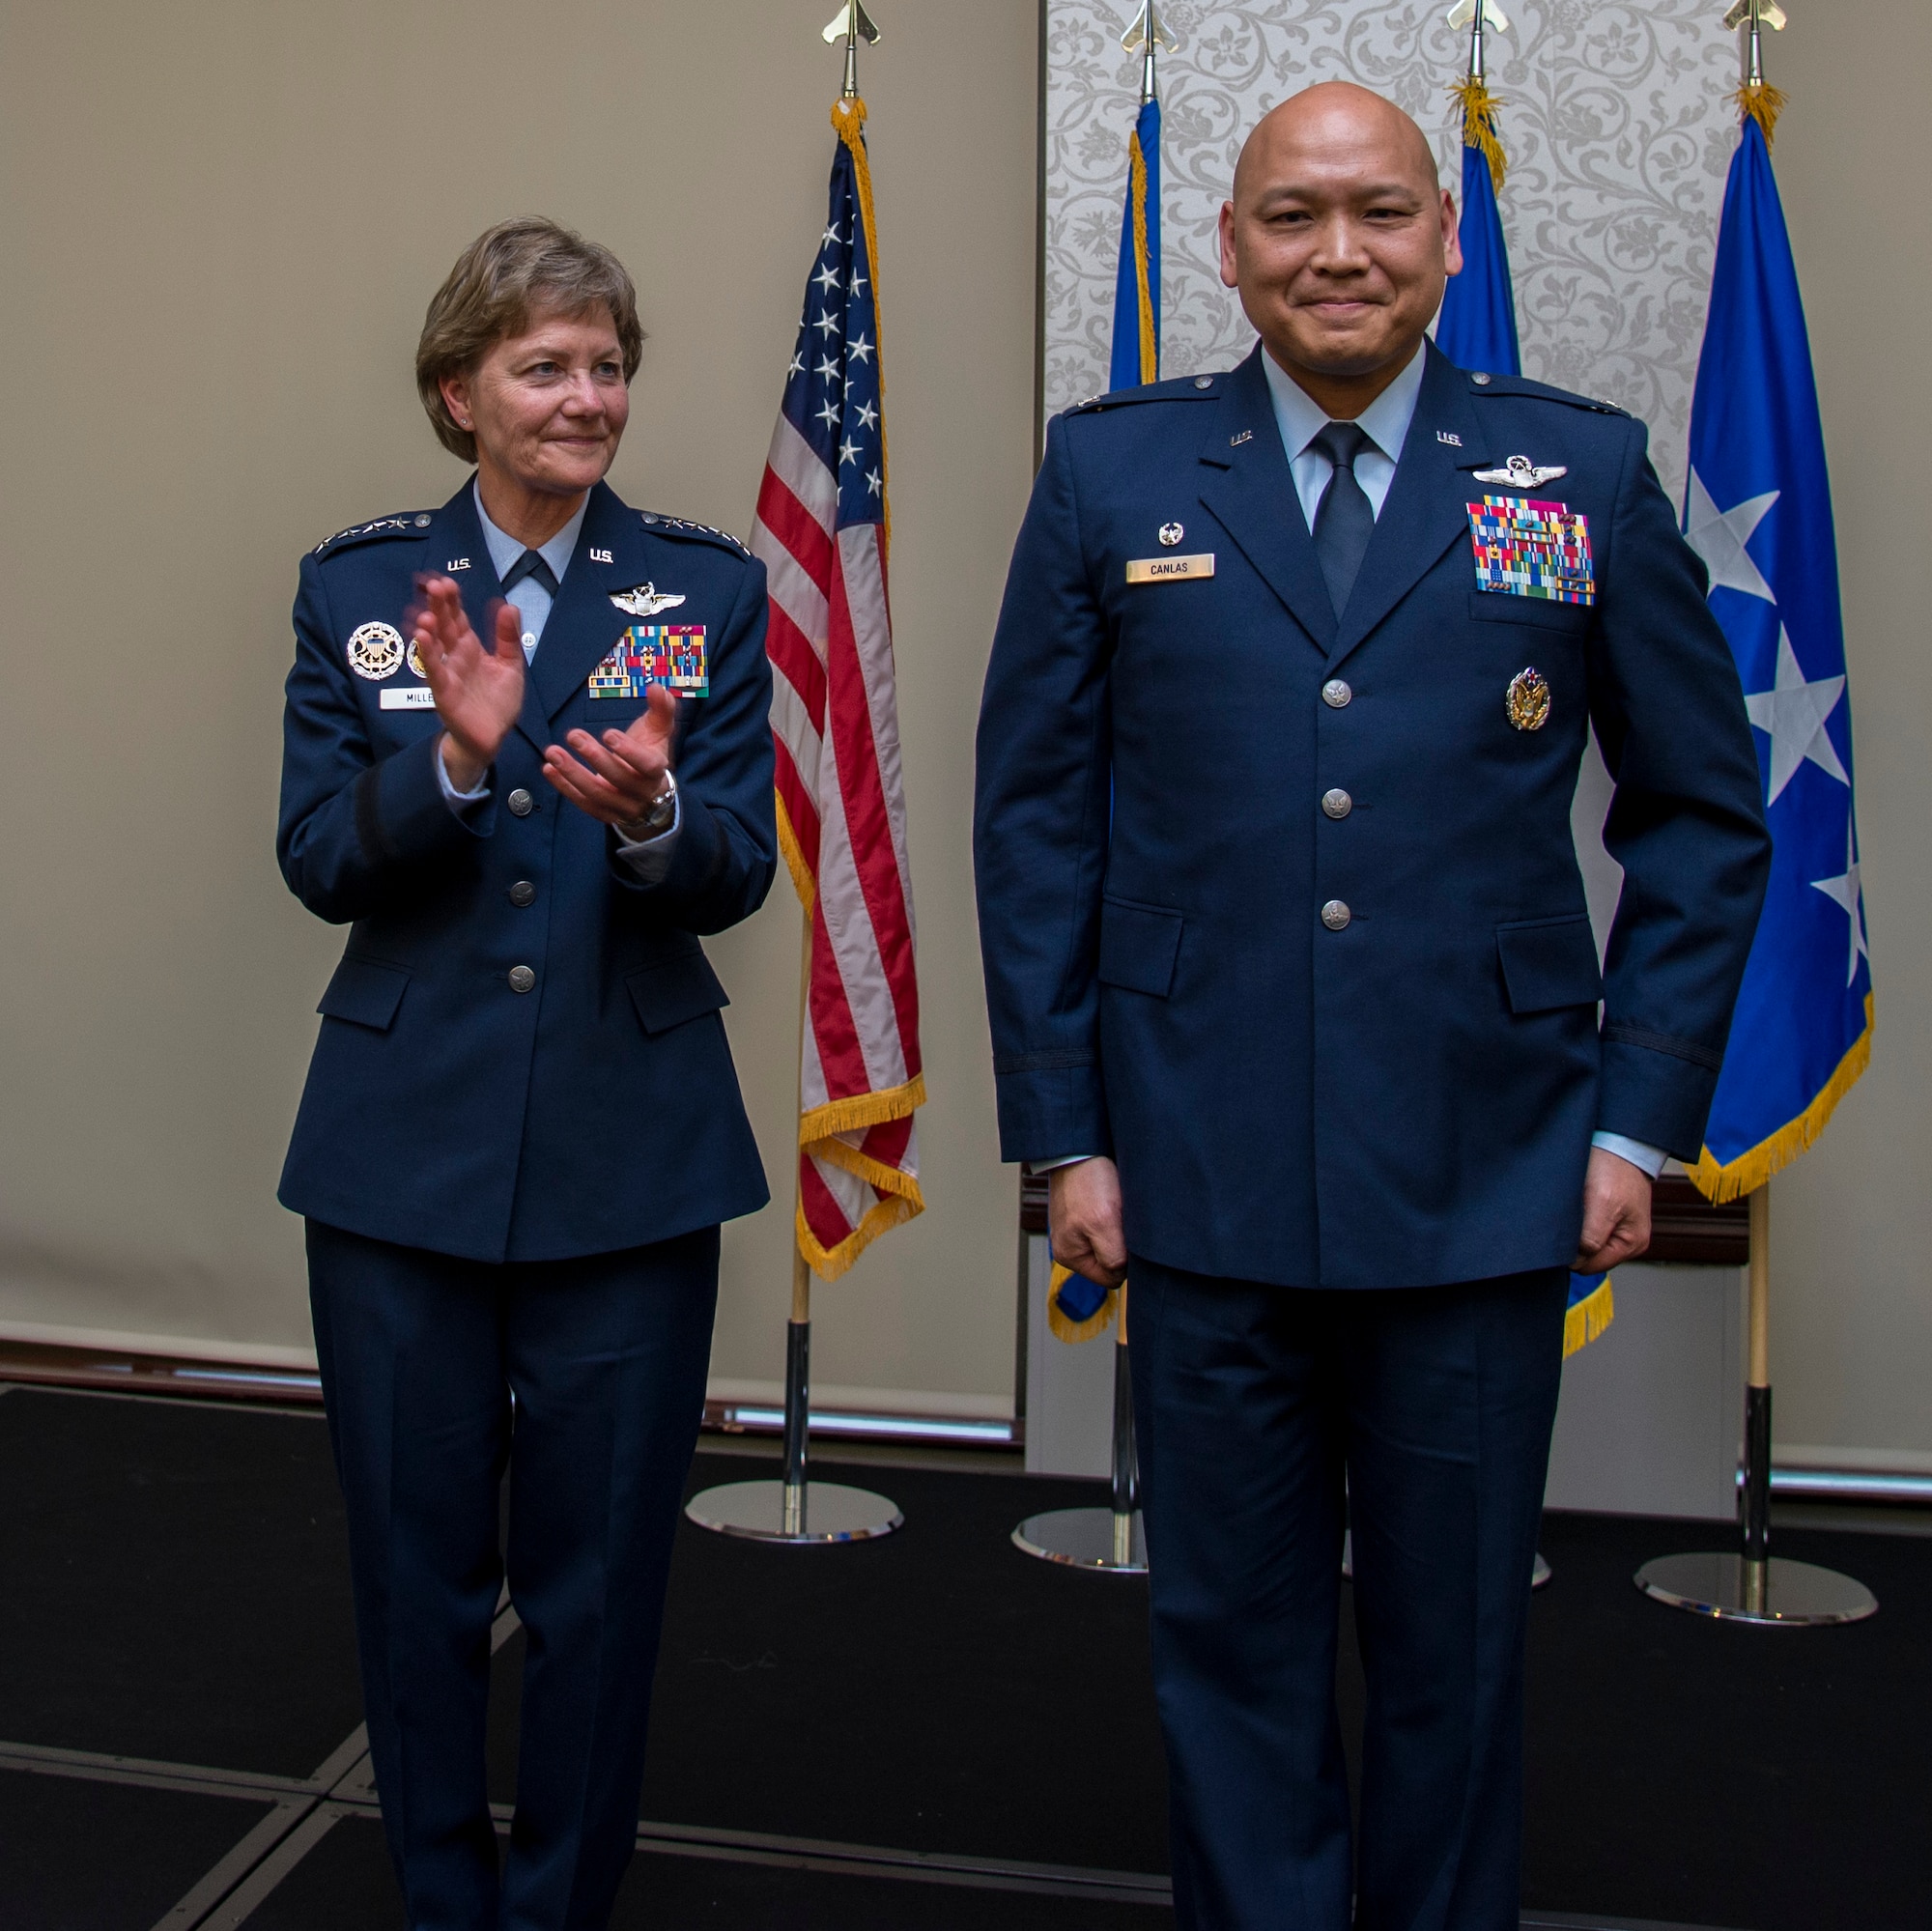 Col. Jimmy Canlas took command of the 618th Air Operations Center at Scott Air Force Base, Illinois, from Brig. Gen. John Lamontagne as Gen. Maryanne Miller, Air Mobility Command commander, presided over the ceremony Jan. 4,  2018.  The 618th AOC, formerly designated the Tanker Airlift Control Center,  is responsible for operational planning, scheduling, directing, and assessing a fleet of approximately 1,100 aircraft in support of combat delivery and strategic airlift, air refueling, and aeromedical operations around the world.